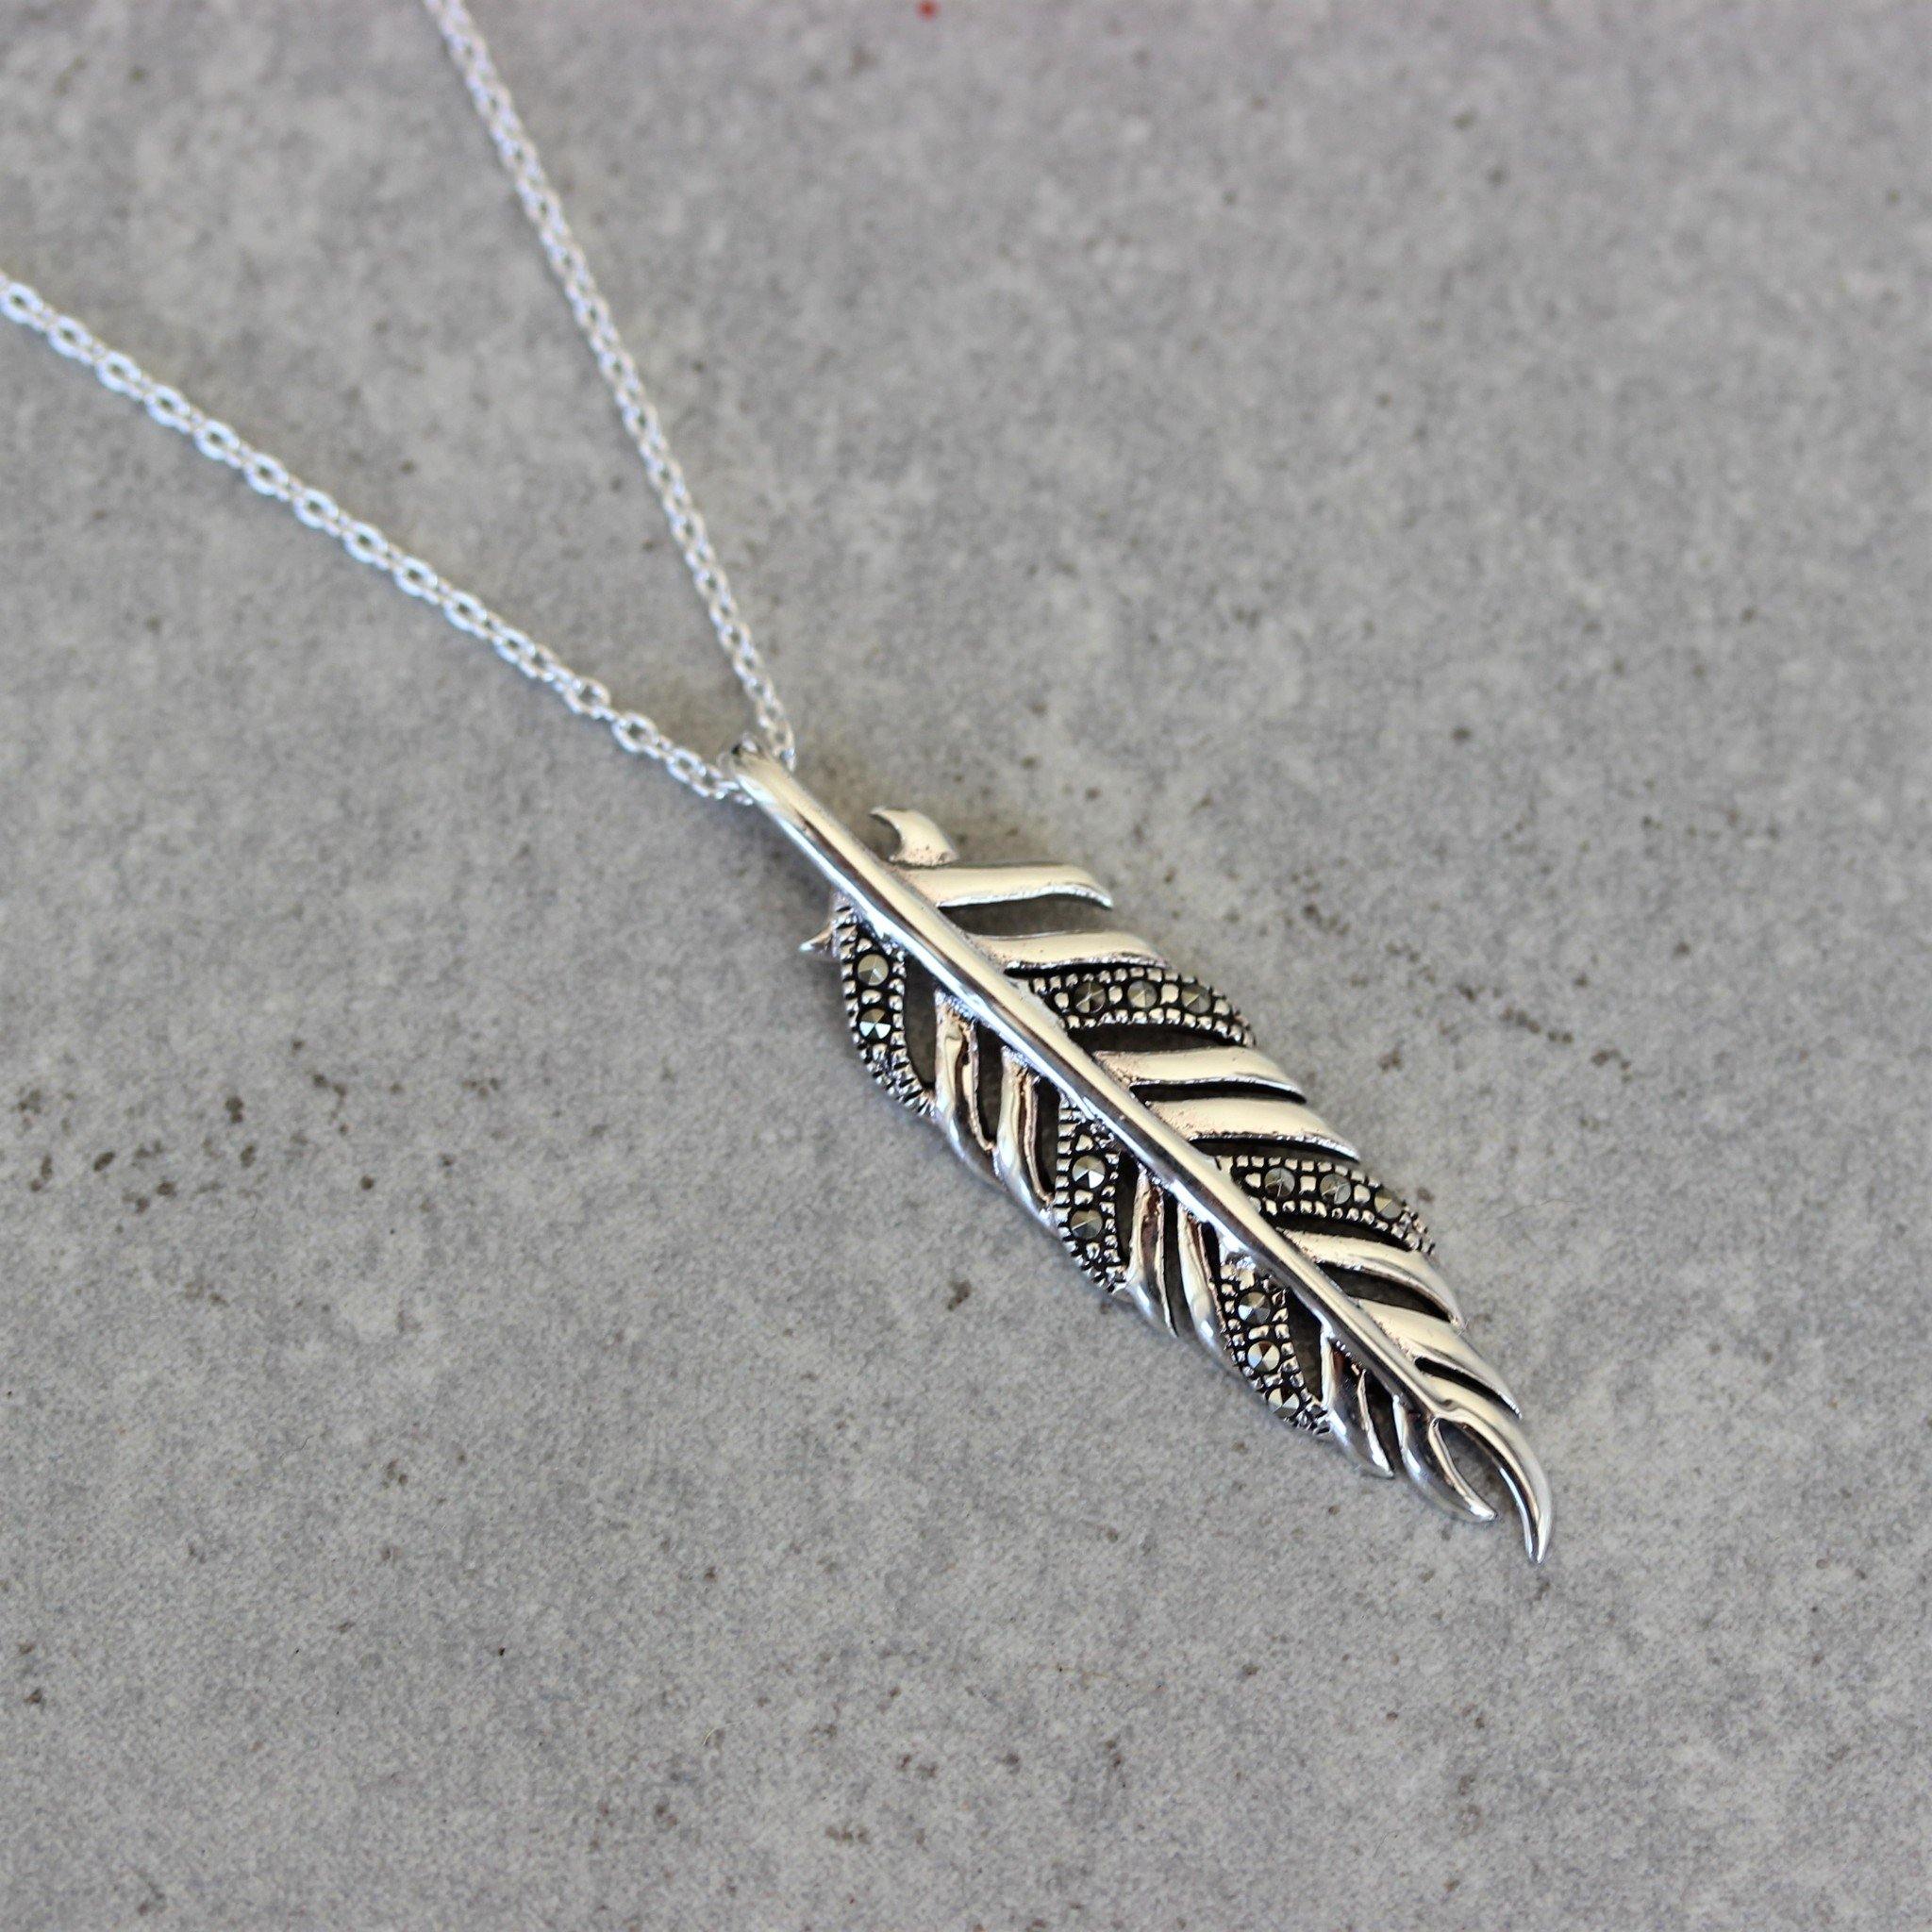 Sterling Silver Marcasite Feather Leaf Leaves Boho Necklace Pendant 42+3cm - STERLING SILVER DESIGNS